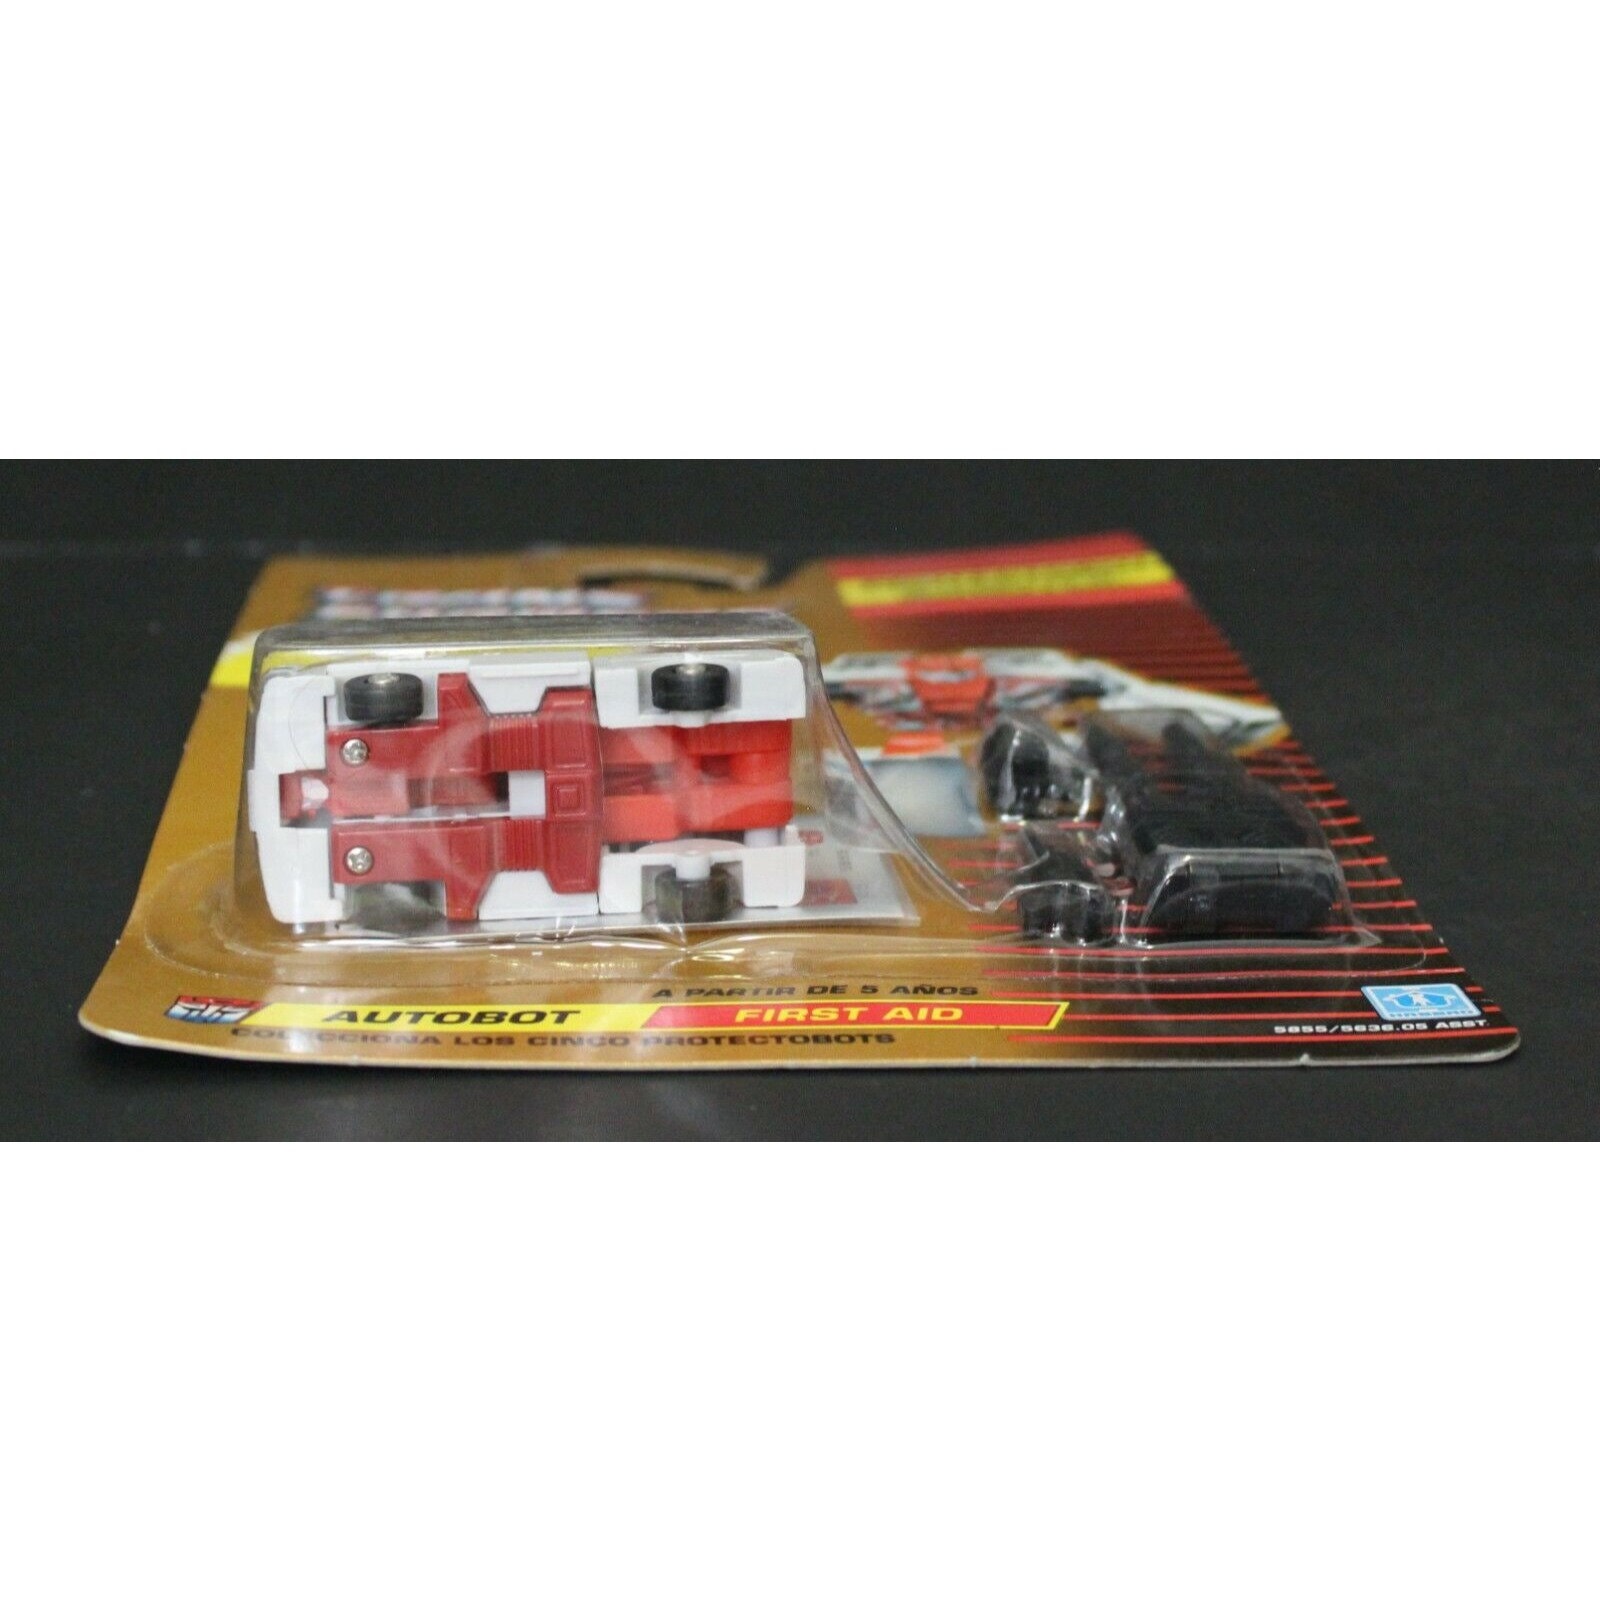 NOT a reissue 1986 Transformers G1 FIRST AID Ambulance Mint On Sealed Euro Classic Golden Card Protectobots Hasbro Original Vintage Figure